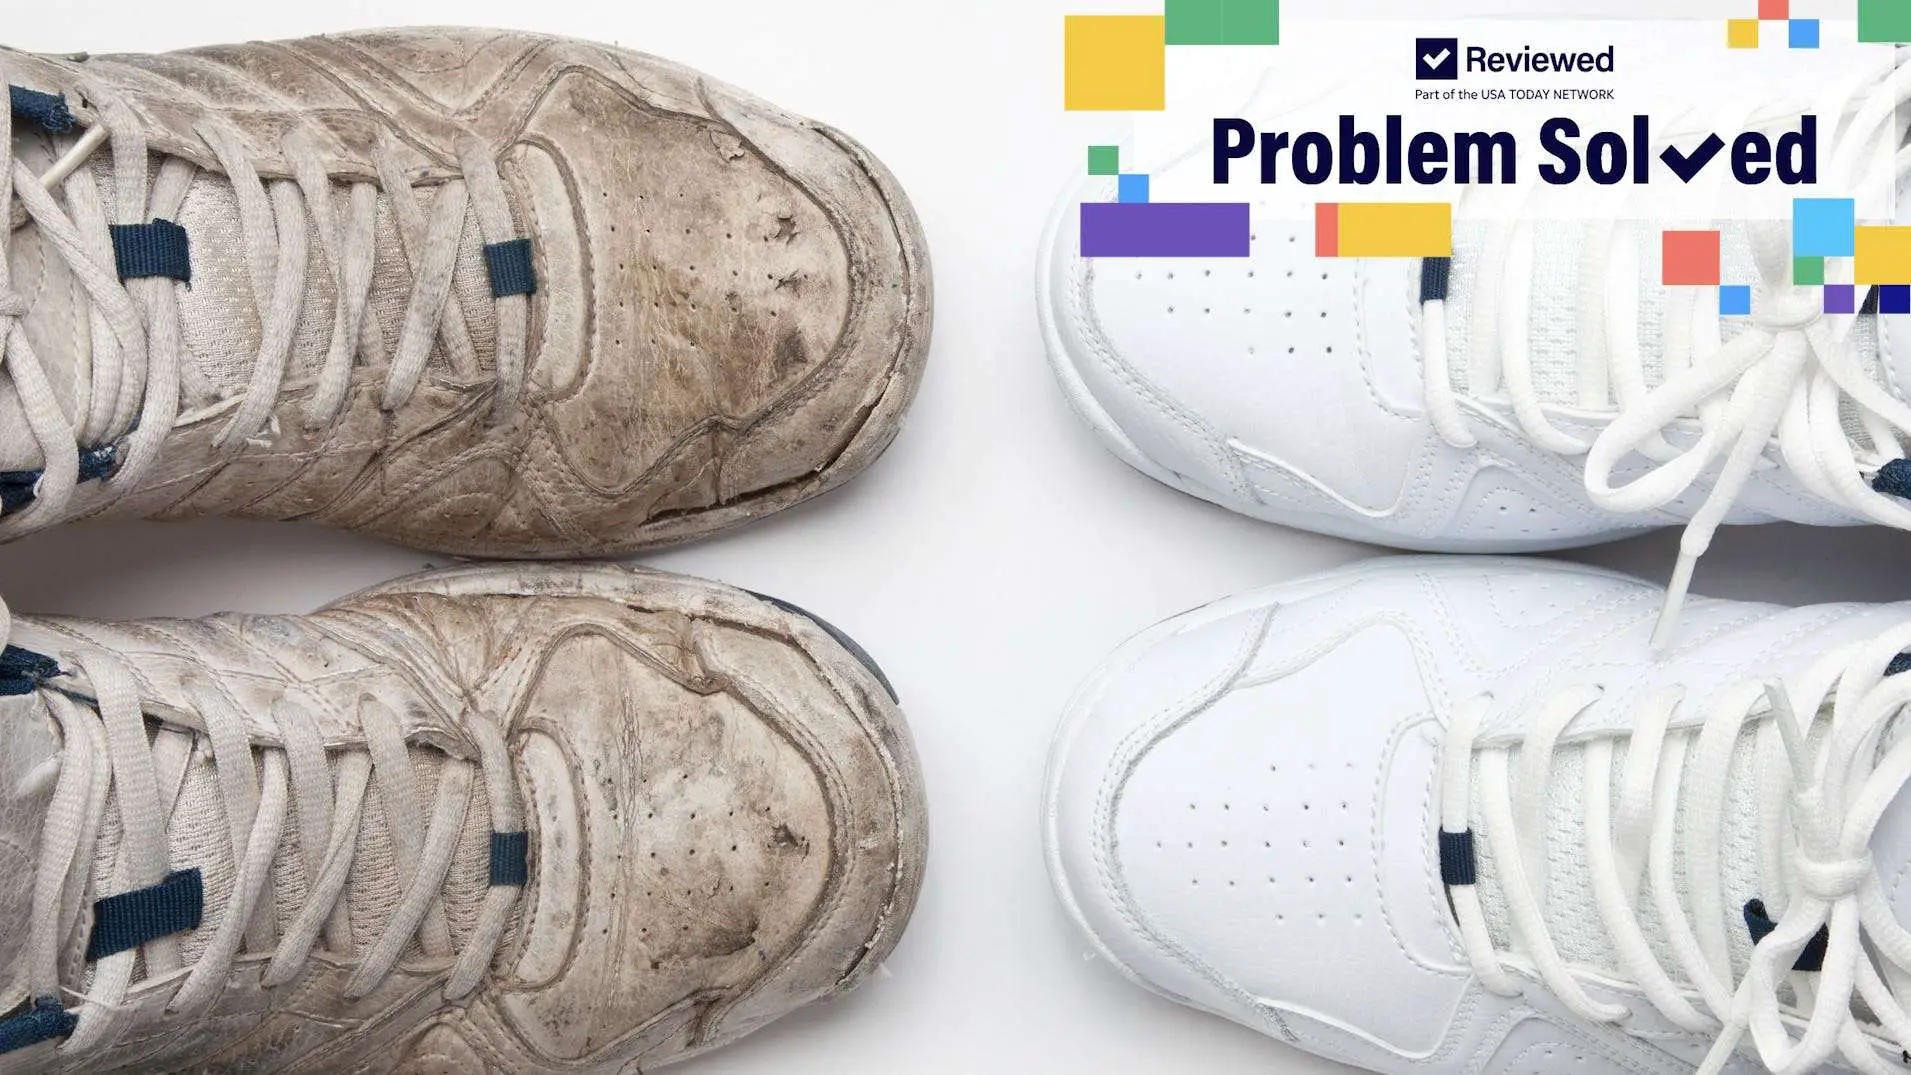 Clean dirty shoes at home with these tips